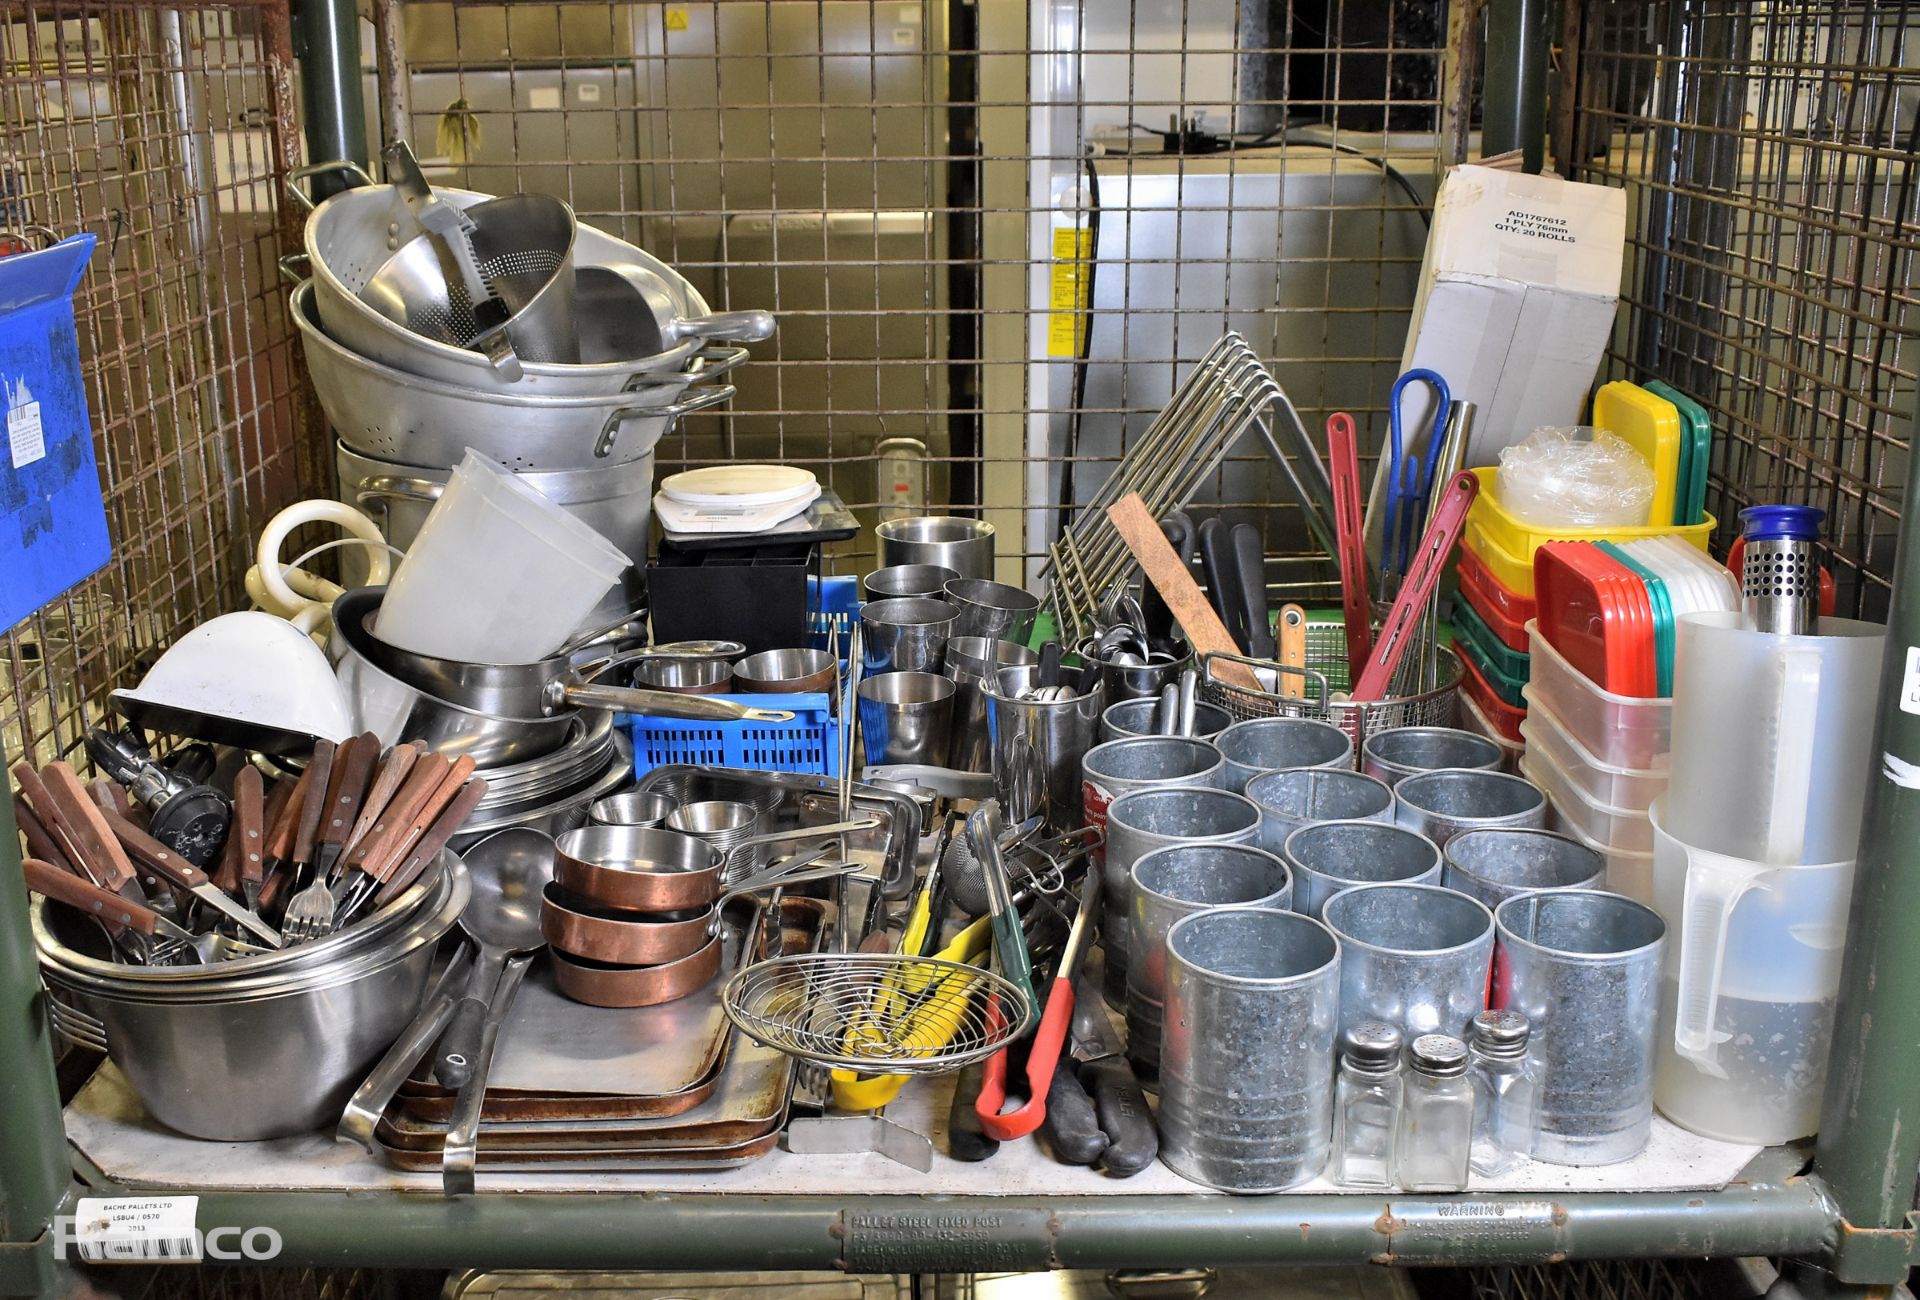 Catering equipment - pans, oven cooking trays, colanders, cutlery and utensils